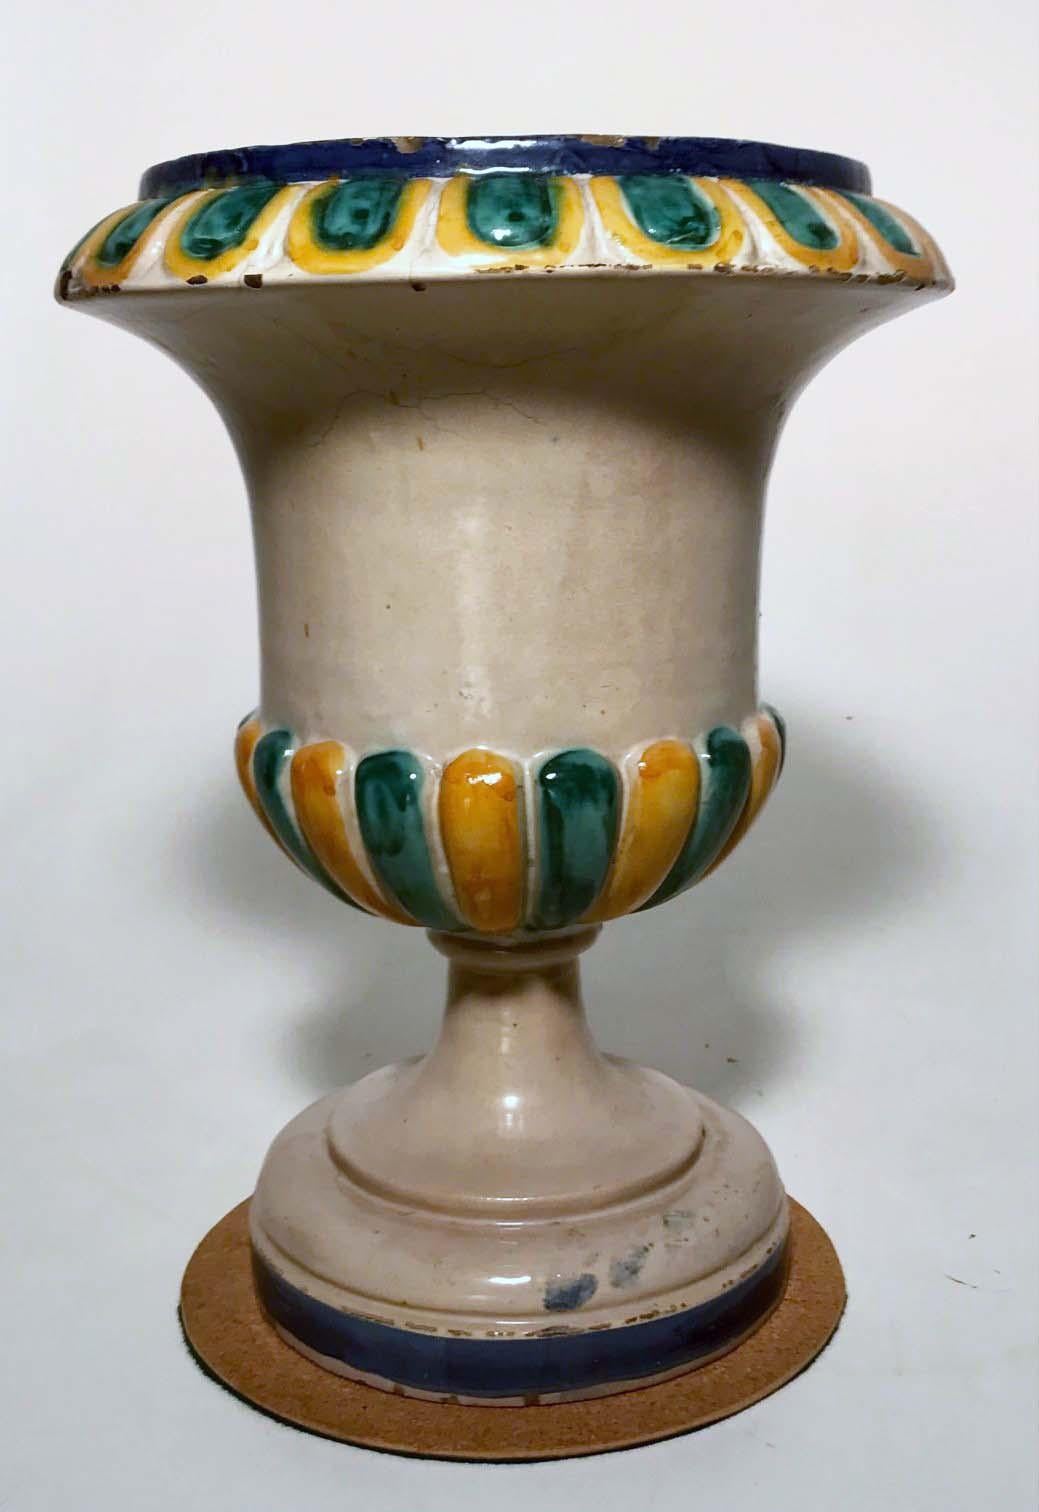 This majolica urn is of campana  form, half-fluted in mustard and  emerald green with  moulded matching rim. It was for a flower pot  originally but might make a stylish wine bucket for alfresco dining.
This bears no visible mark but seems to be